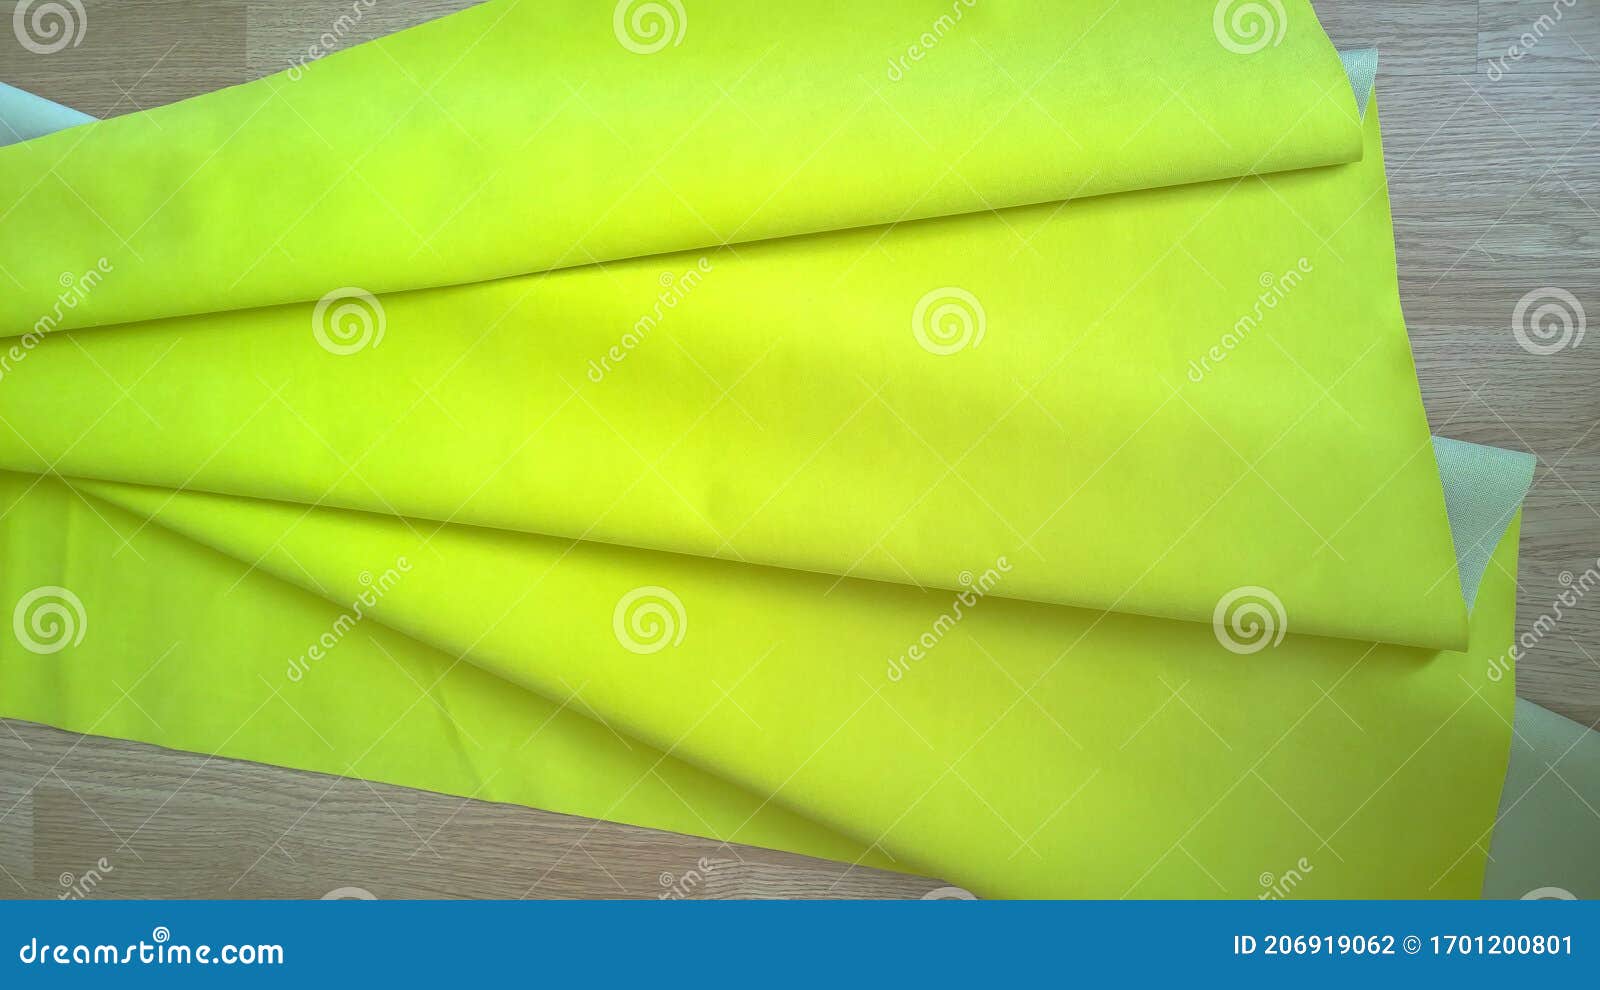 Premium Photo  Background of different colors of fabric material for sewing